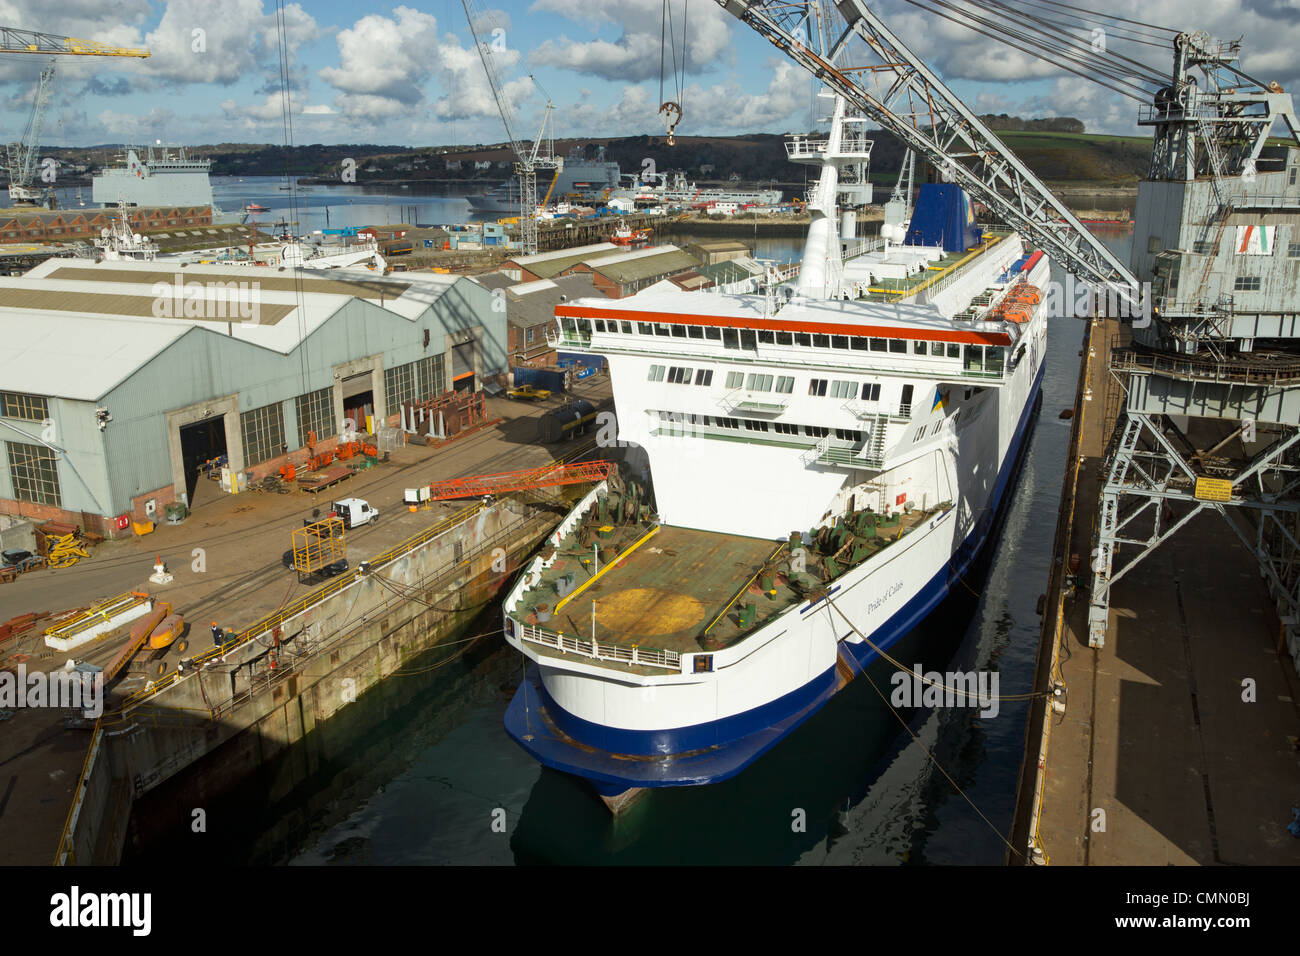 The P&O MS Pride of Calais ferry in a Falmouth dockyard dry dock for an annual refit. Stock Photo